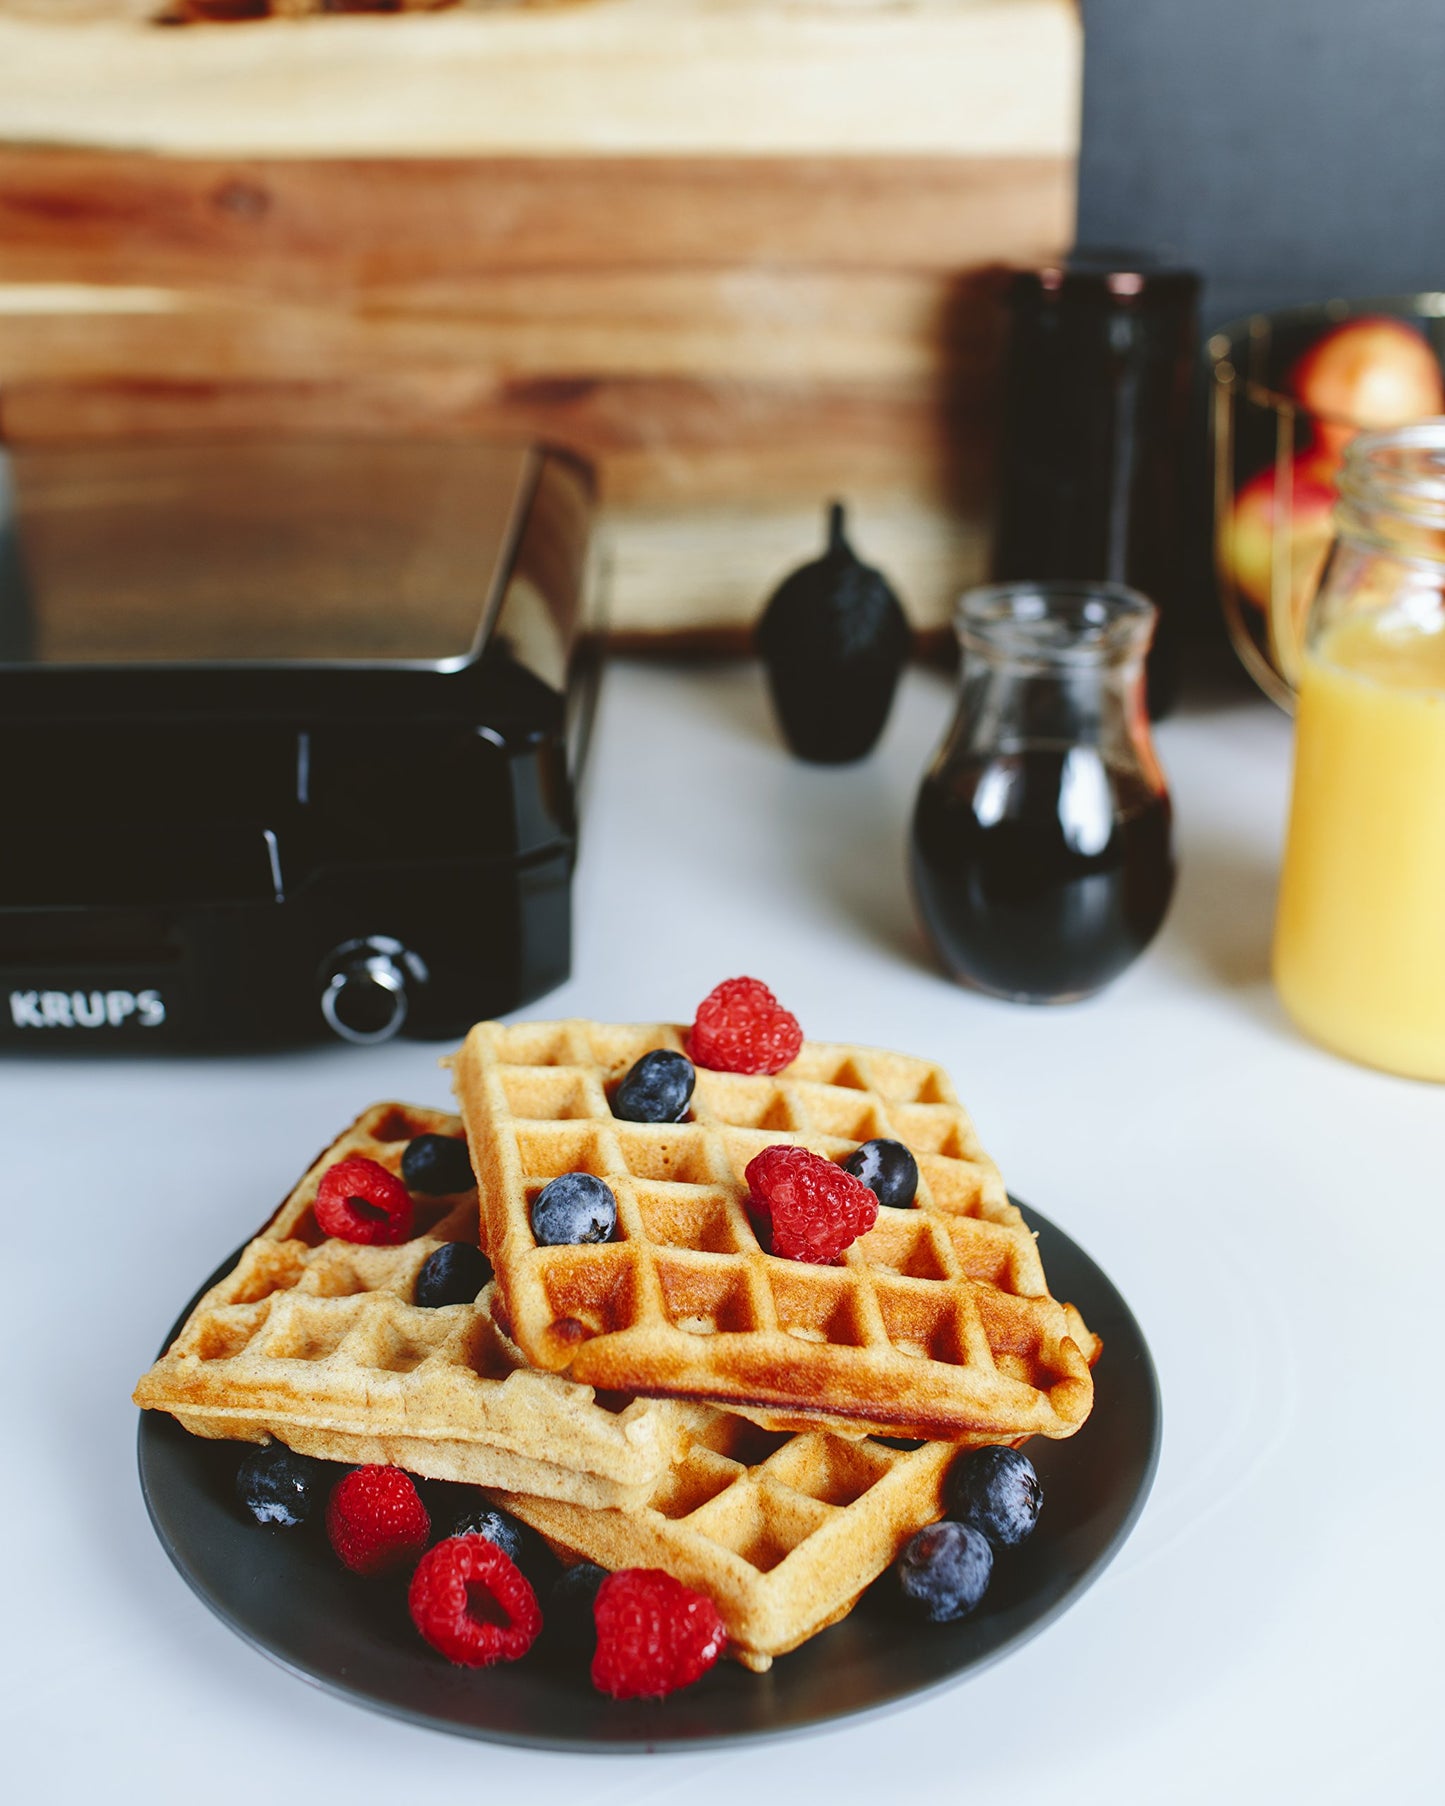 Krups Breakfast Set Stainless Steel Waffle Maker 4 Slices Audible "Ready" Beep, 1200 Watts Square, 5 Browning Levels, Removable Plates, Dishwasher Safe, Belgian Waffle Silver and Black